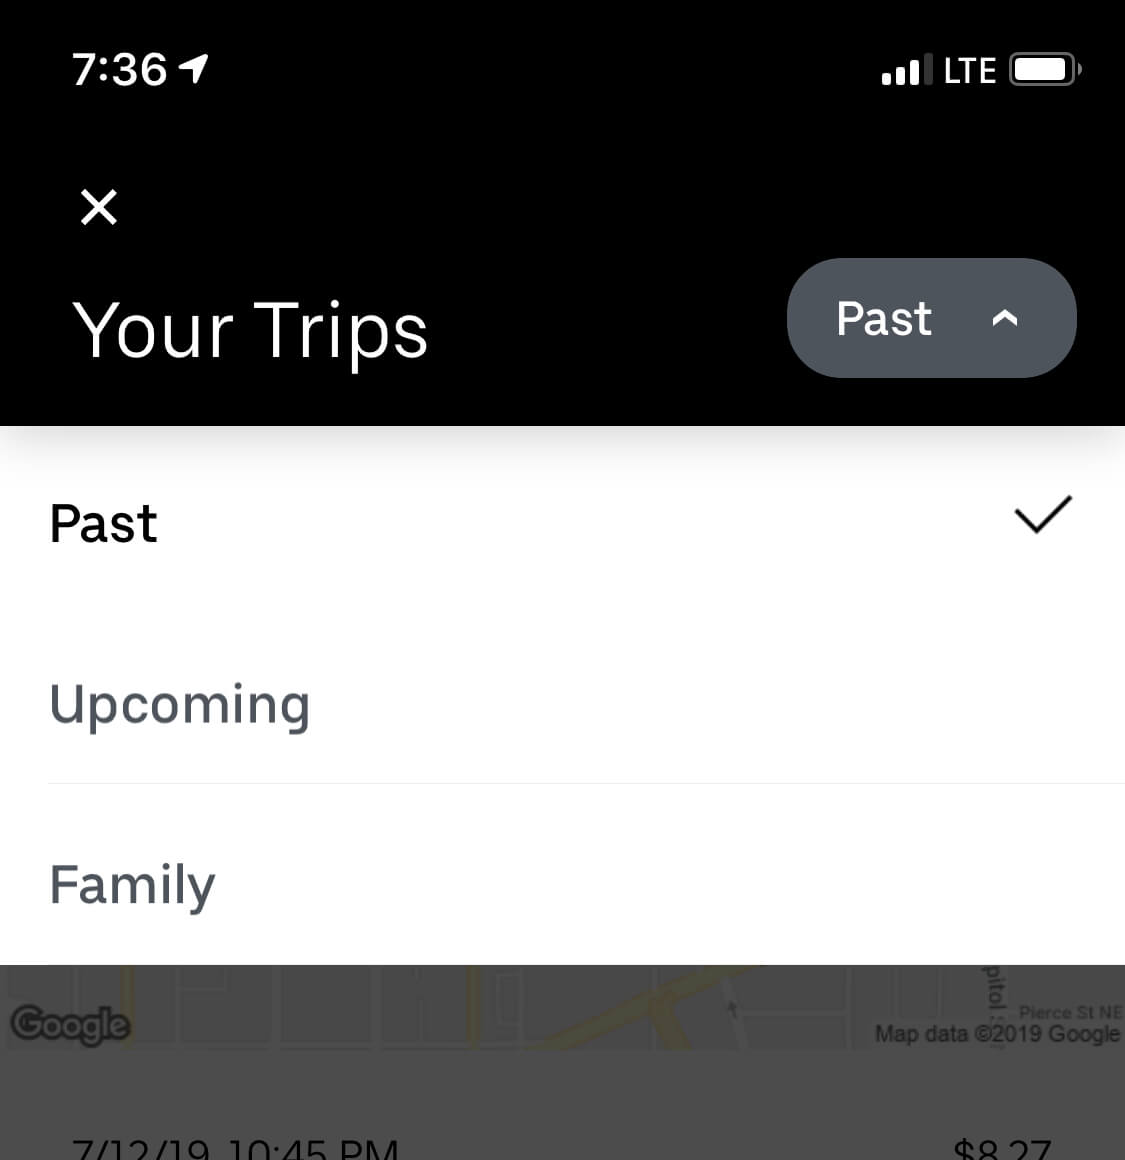 Schedule Uber: the app menu dropdown for "Your Trips"